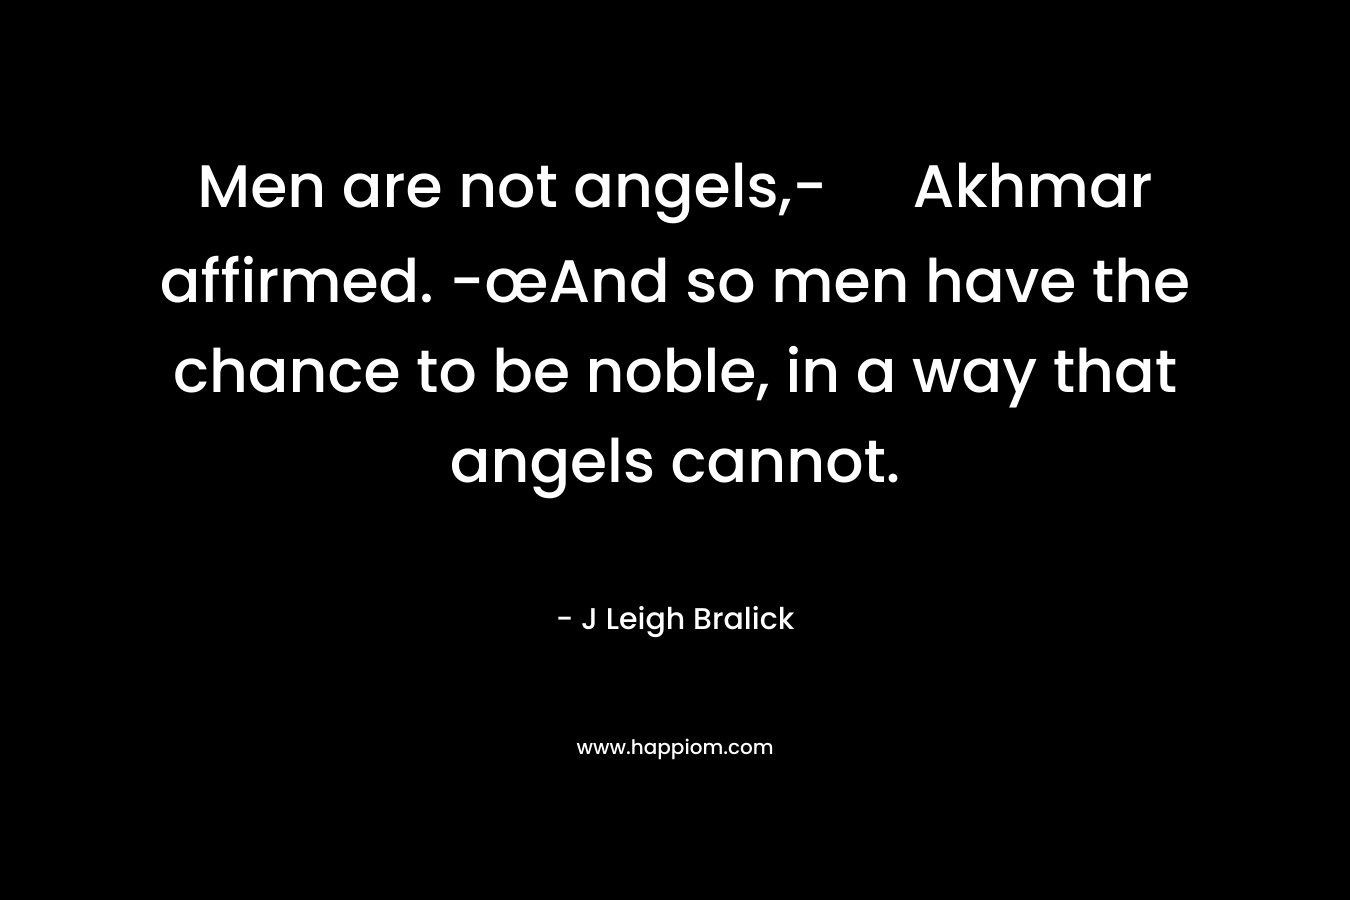 Men are not angels,- Akhmar affirmed. -œAnd so men have the chance to be noble, in a way that angels cannot.